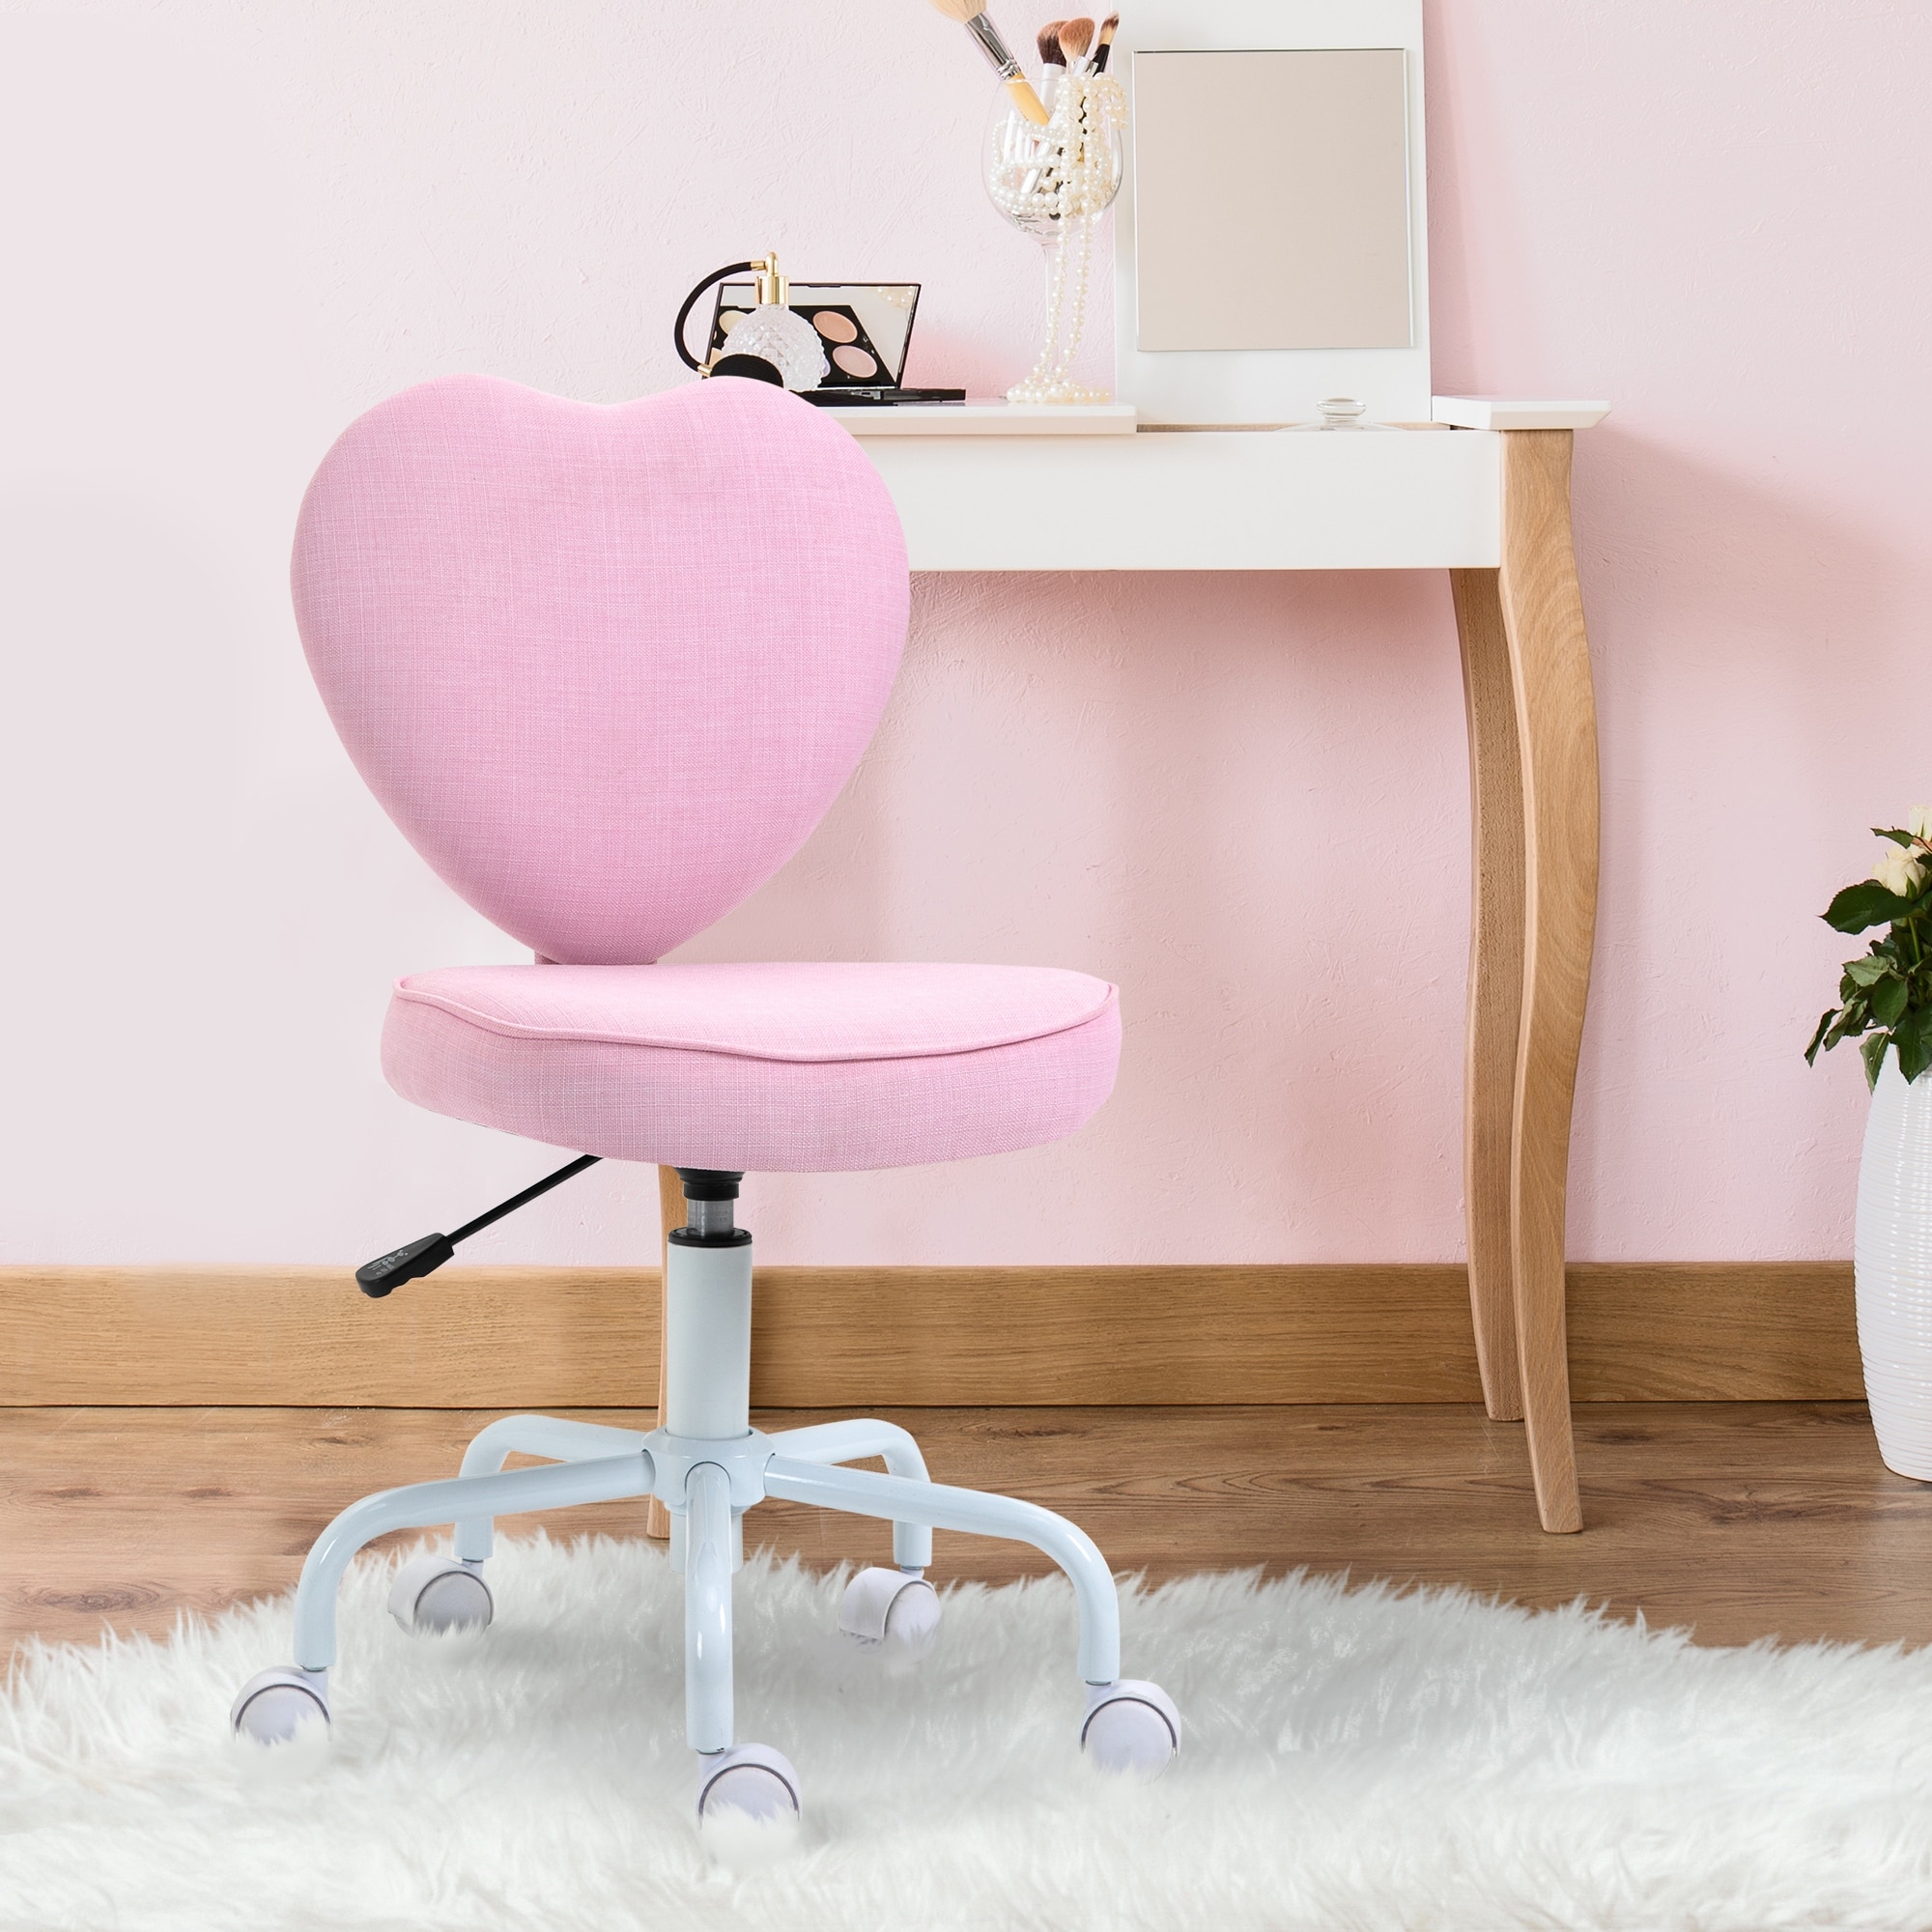 https://ak1.ostkcdn.com/images/products/is/images/direct/ccc04f32cd84d6fdc105c5dfdd6fa7b4c40332f1/HOMCOM-Heart-Love-Shaped-Back-Design-Office-Chair-with-Adjustable-Height-and-360-Swivel-Castor-Wheels%2C-Pink.jpg